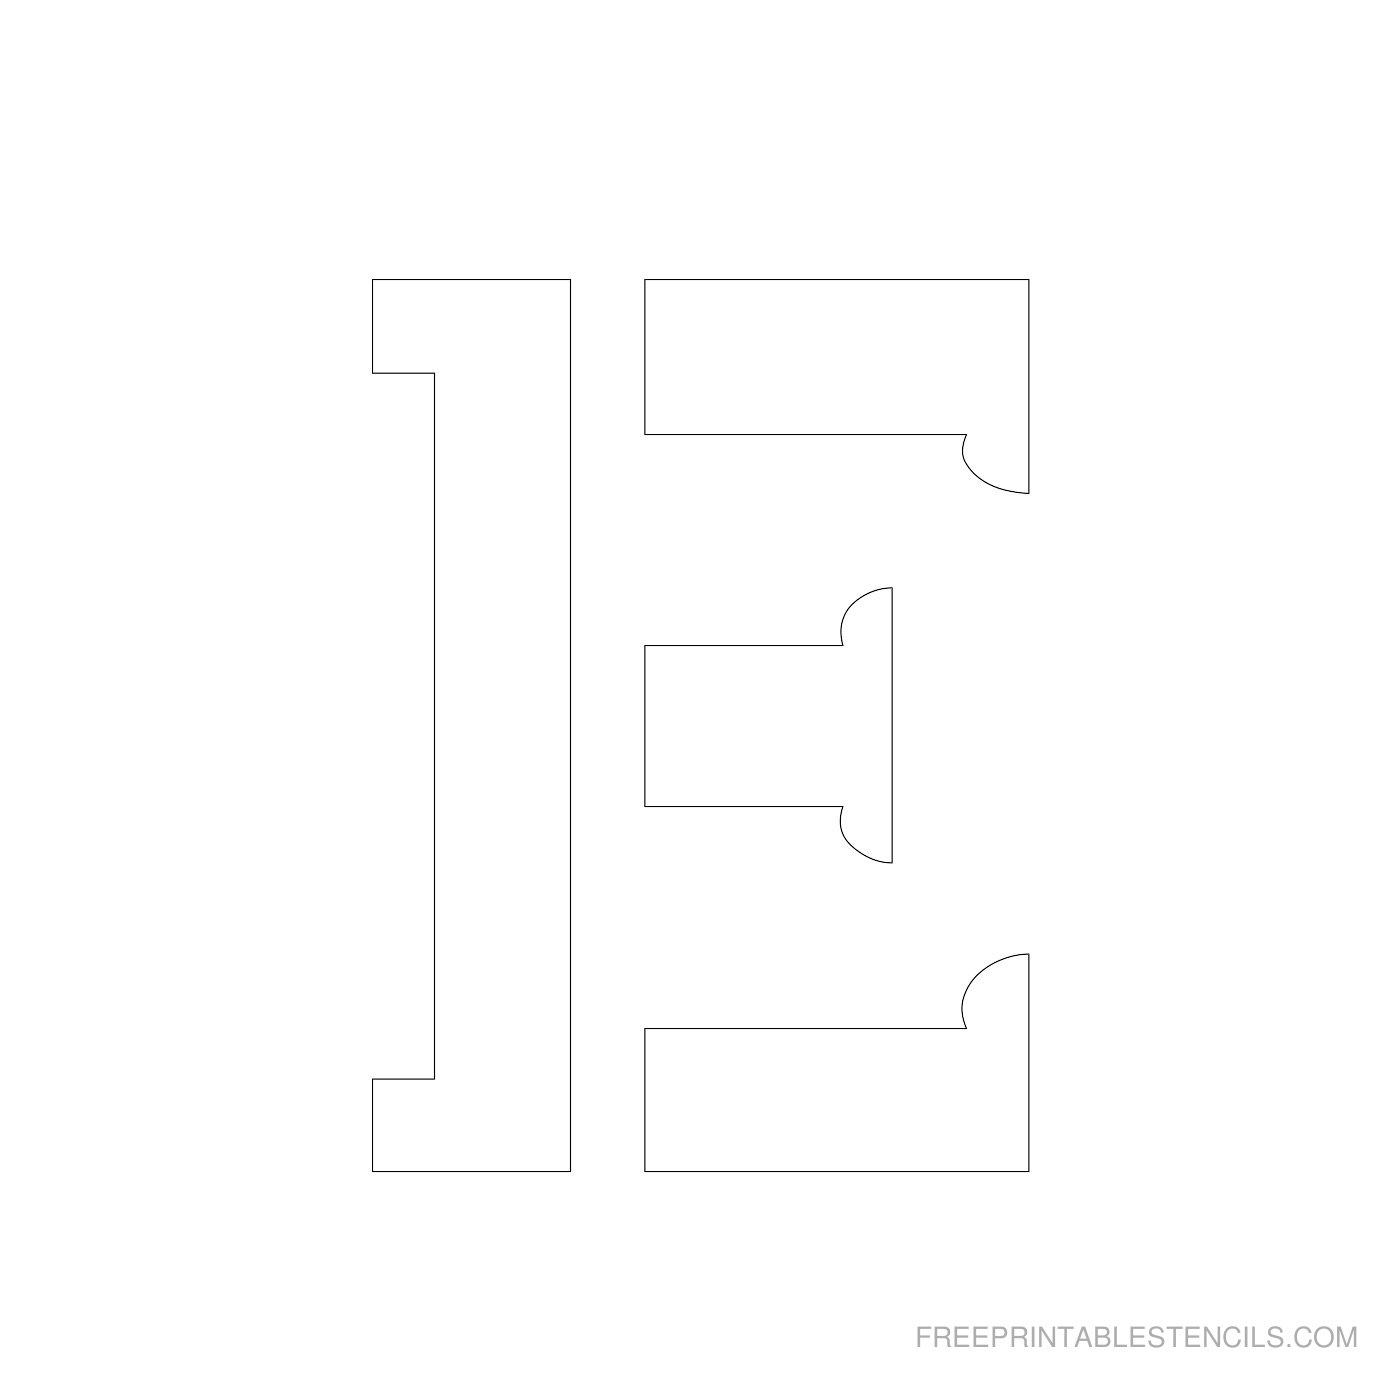 Printable 4 Inch Letter Stencils A-Z | Free Printable Stencils - Free Printable 4 Inch Number Stencils